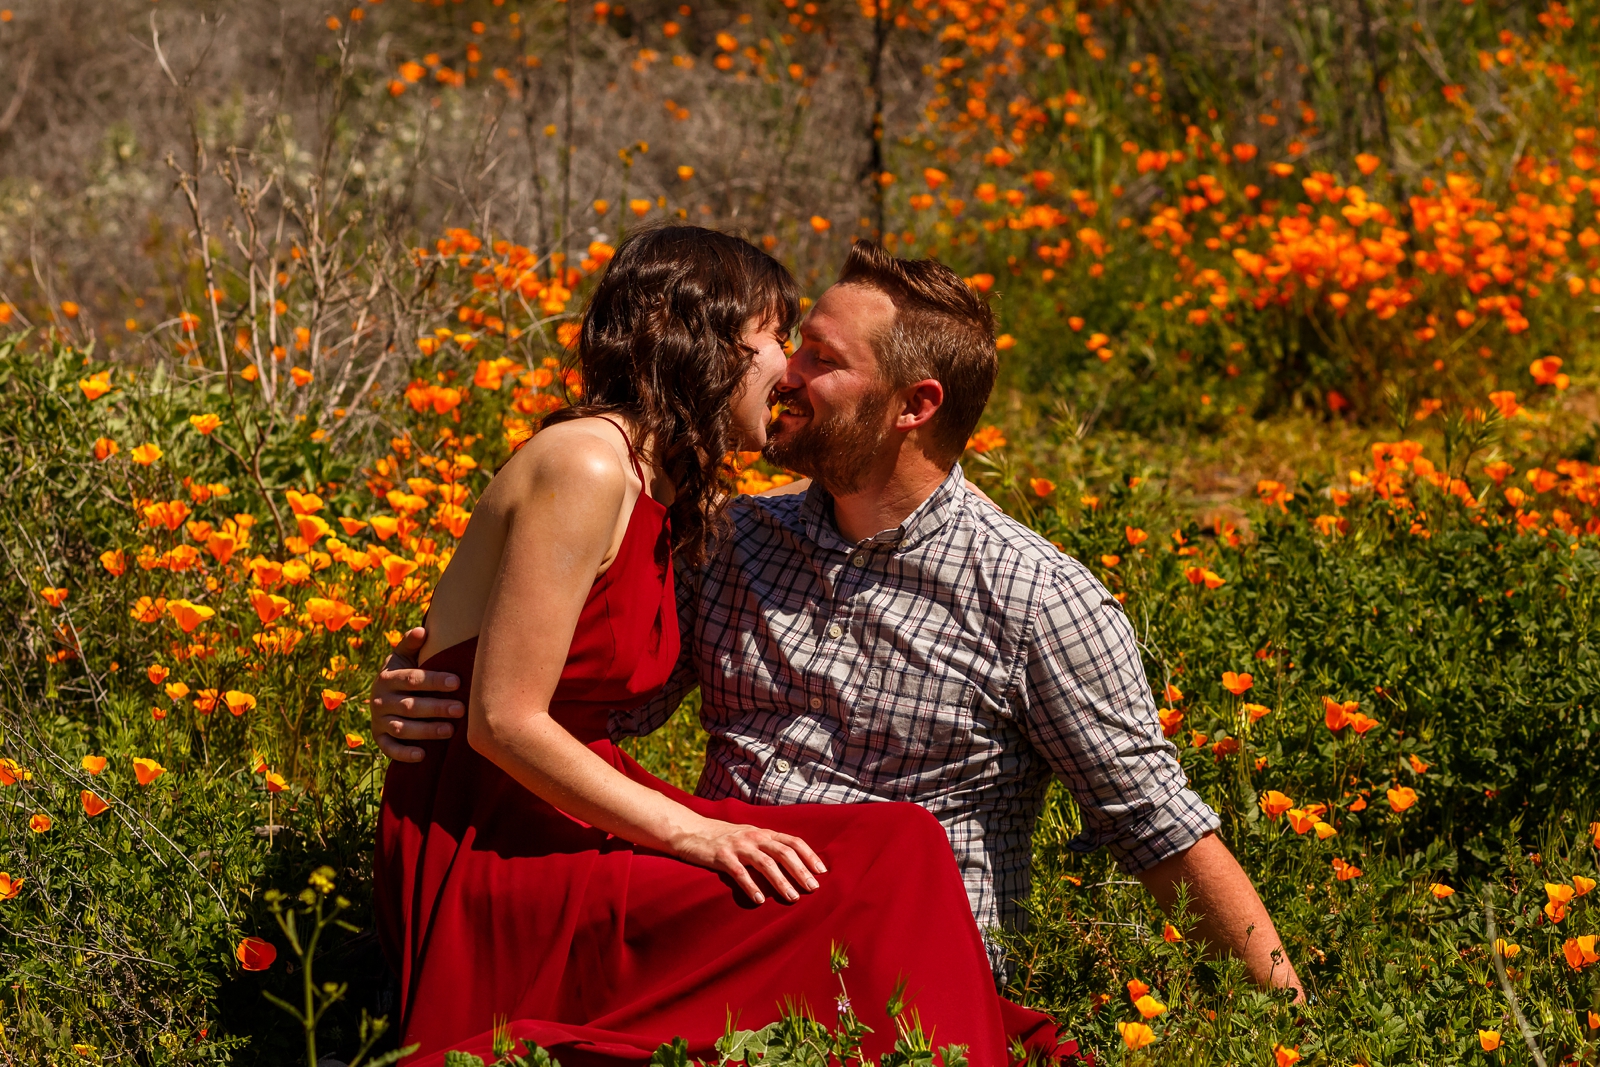 Engaged couple kissing in the spring